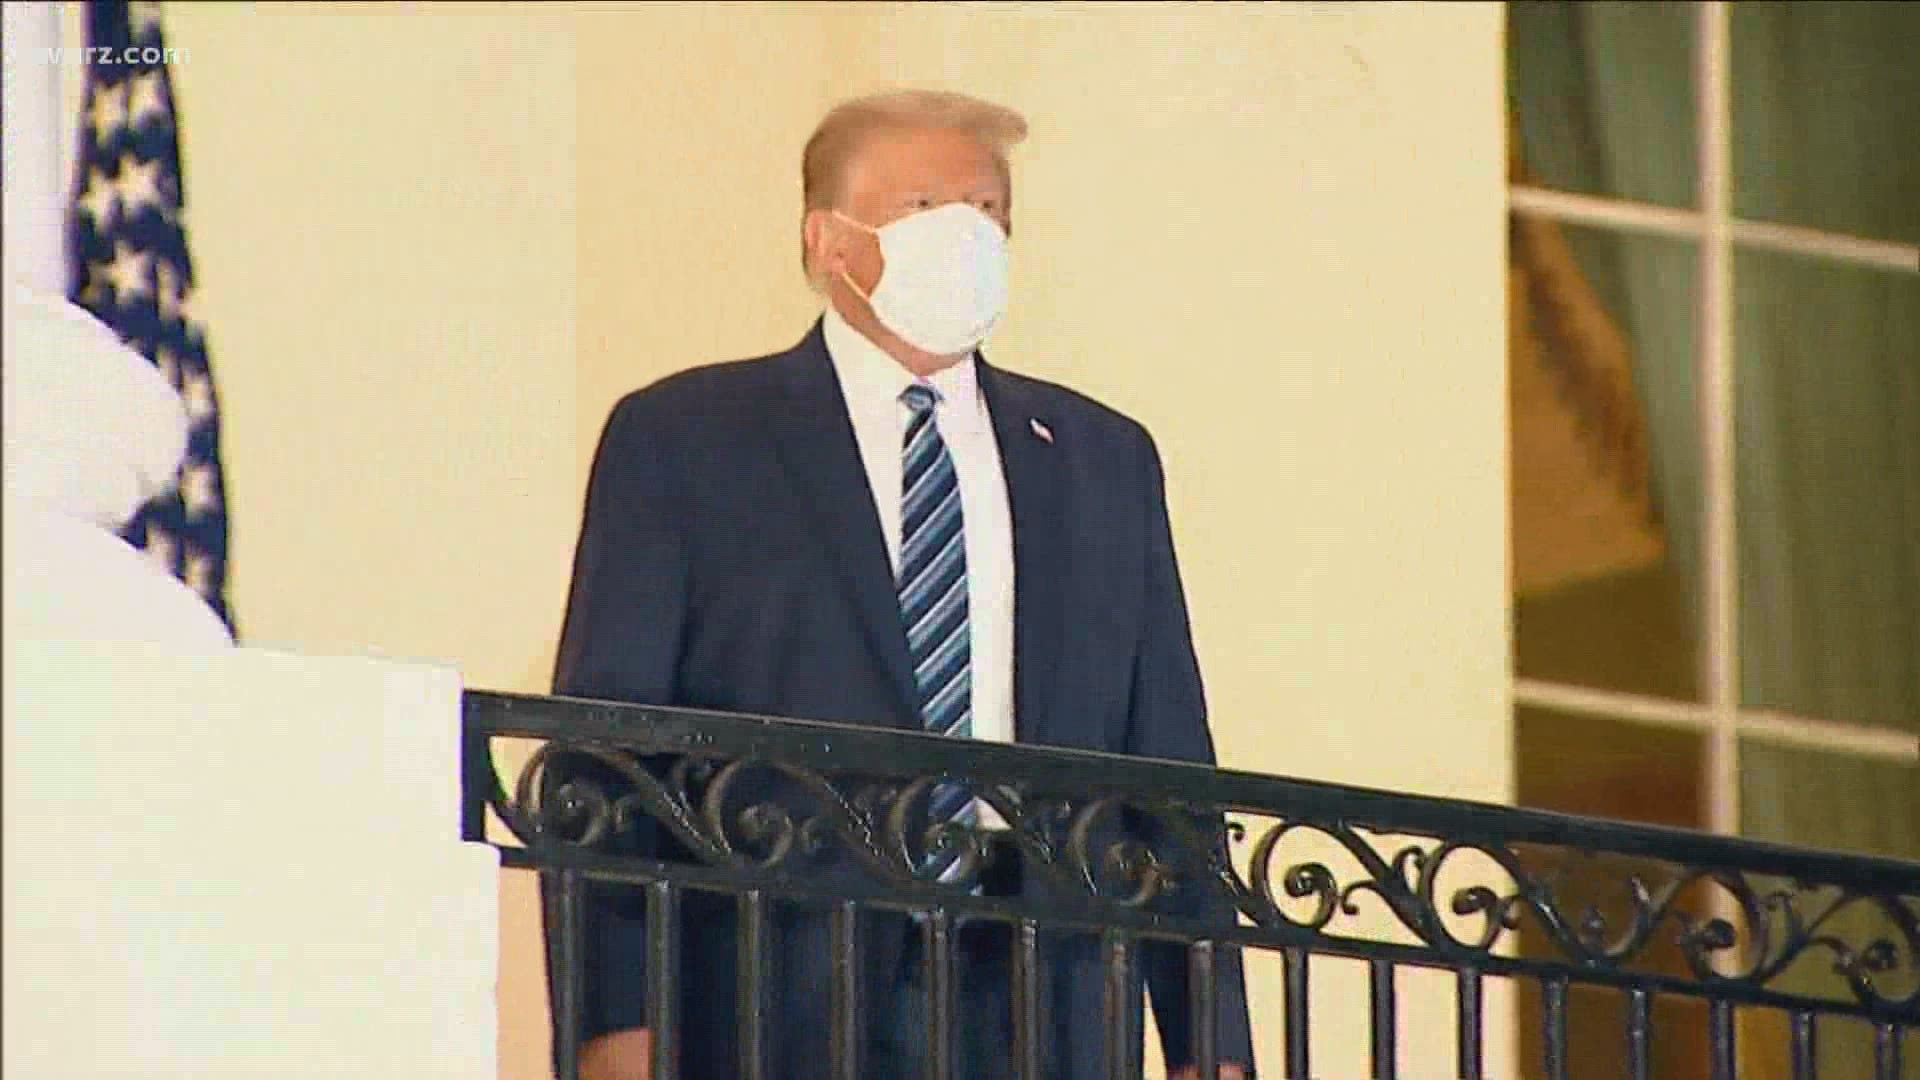 After the short helicopter ride from Walter Reed Medical Center to the White House, he was seen walking up the steps outside the front lawn.